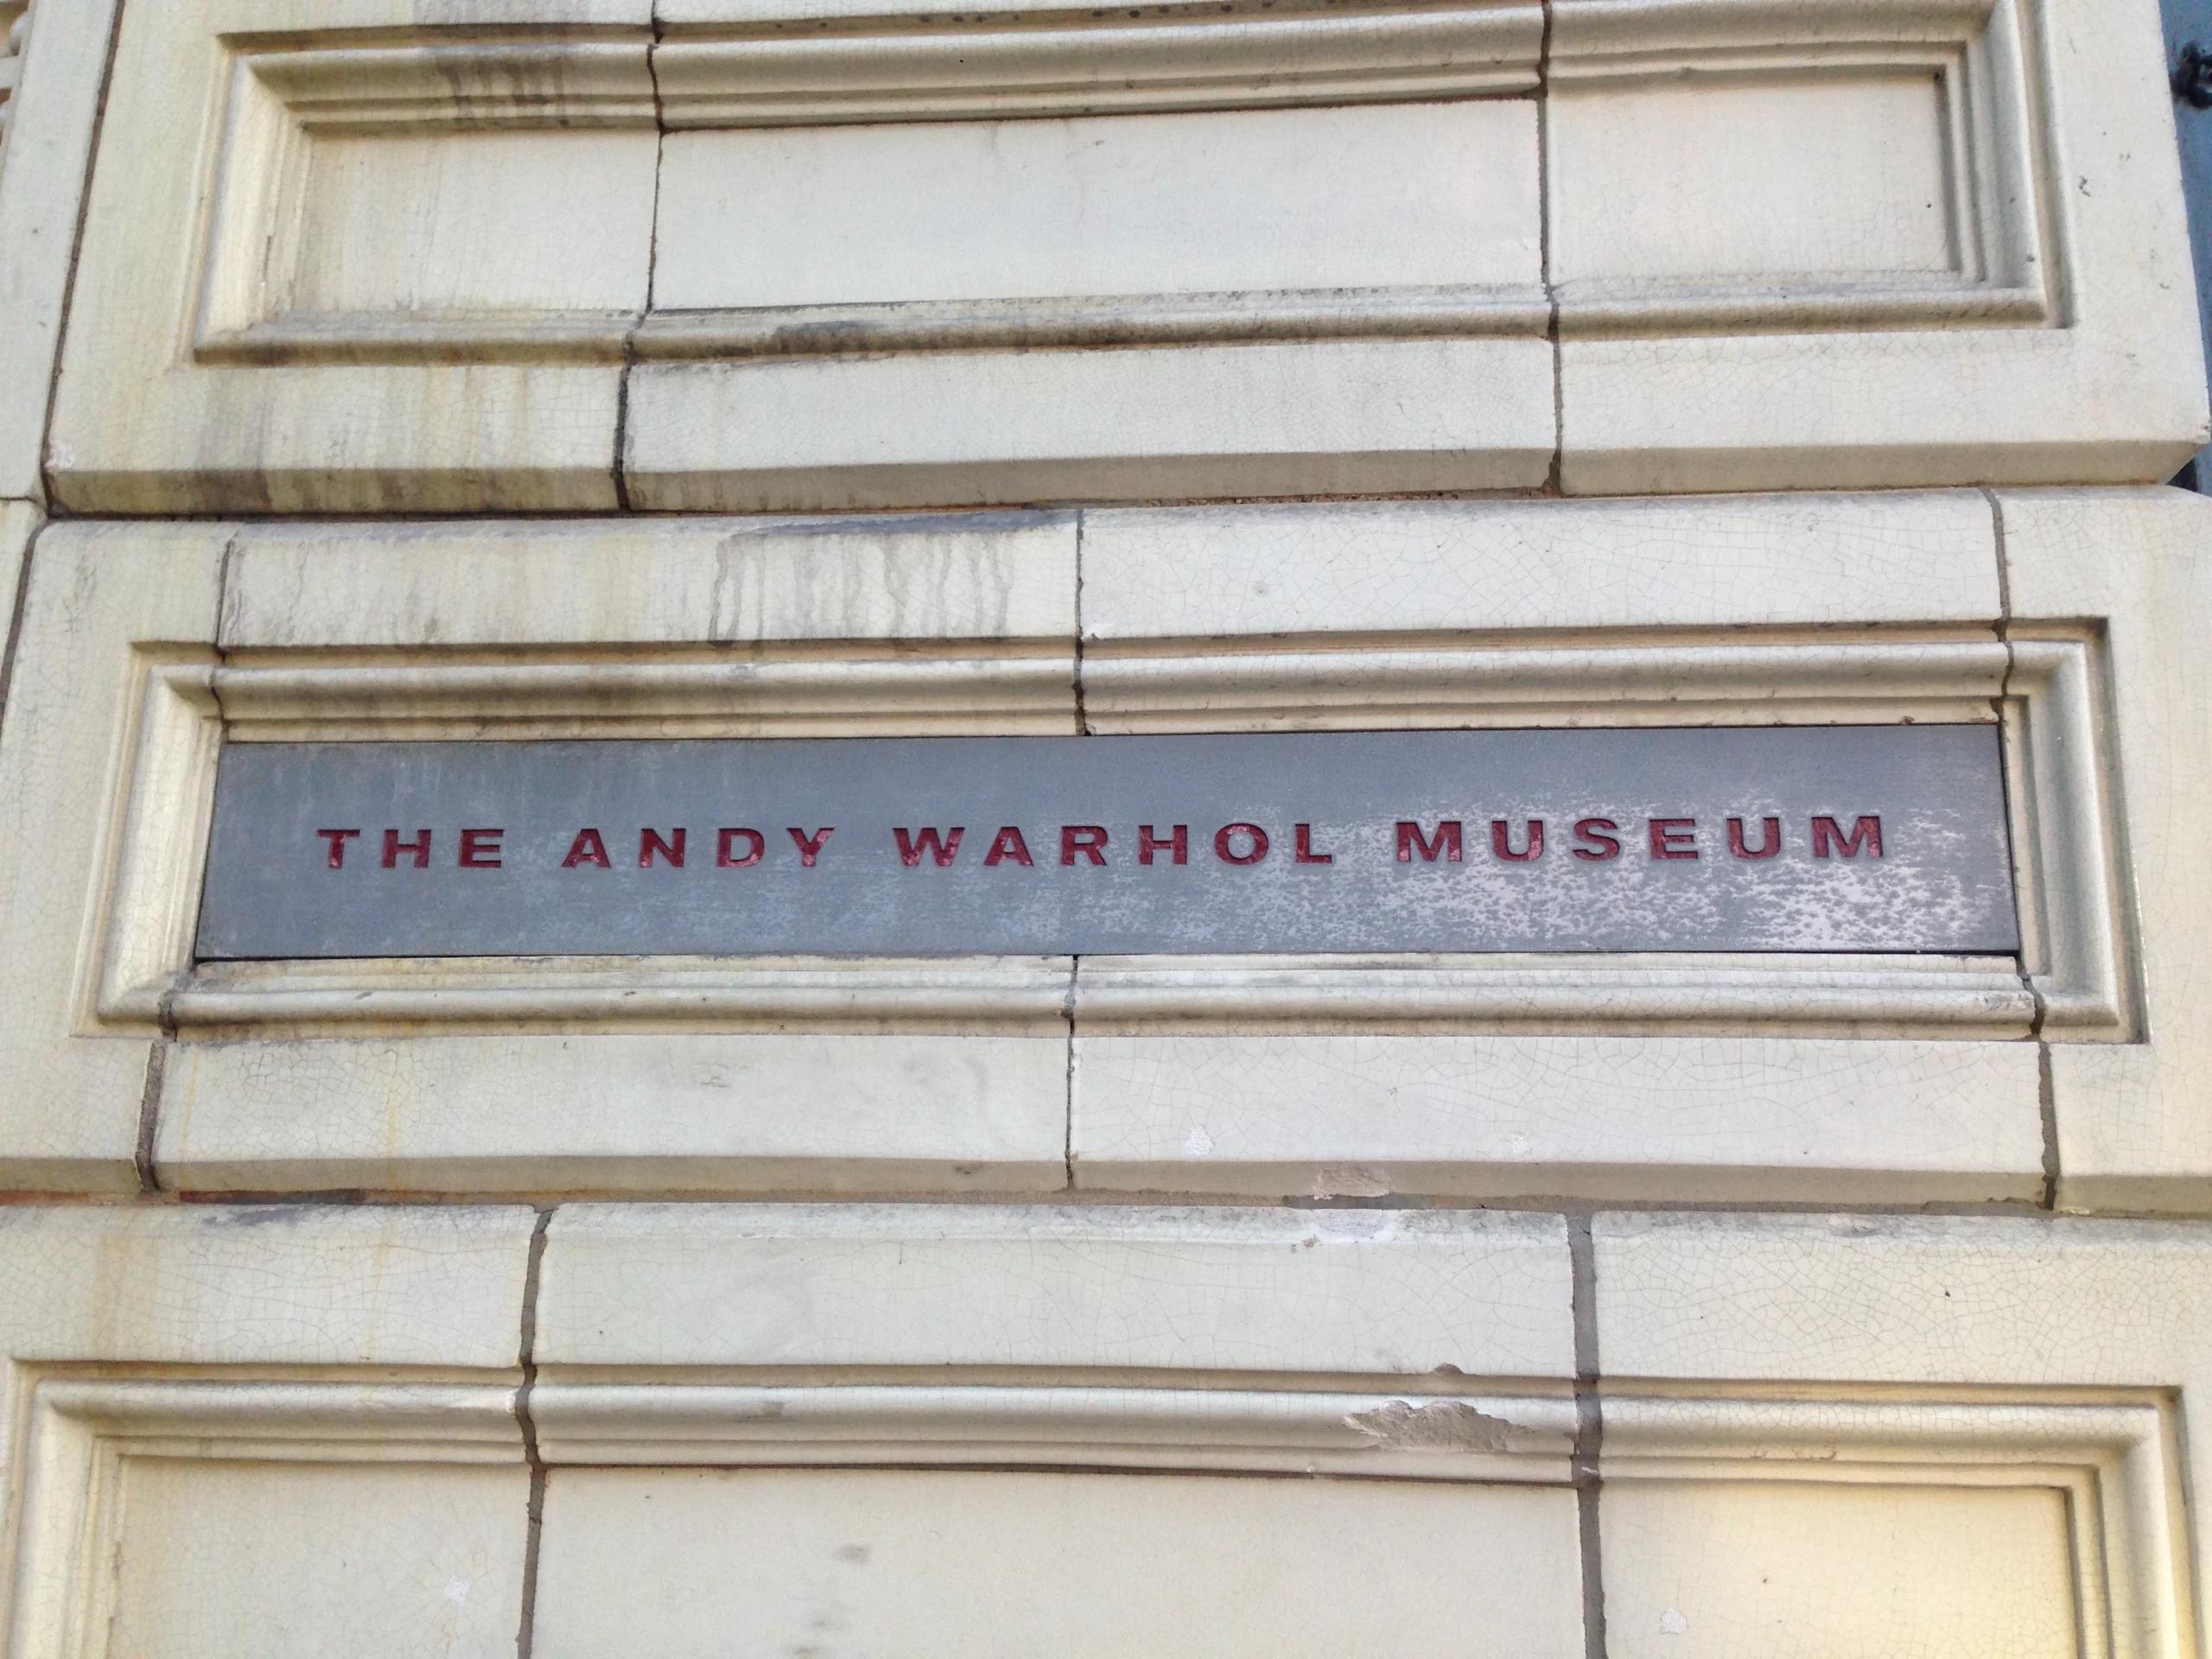 A sign on the side of a building that reads "The Andy Warhol Museum"